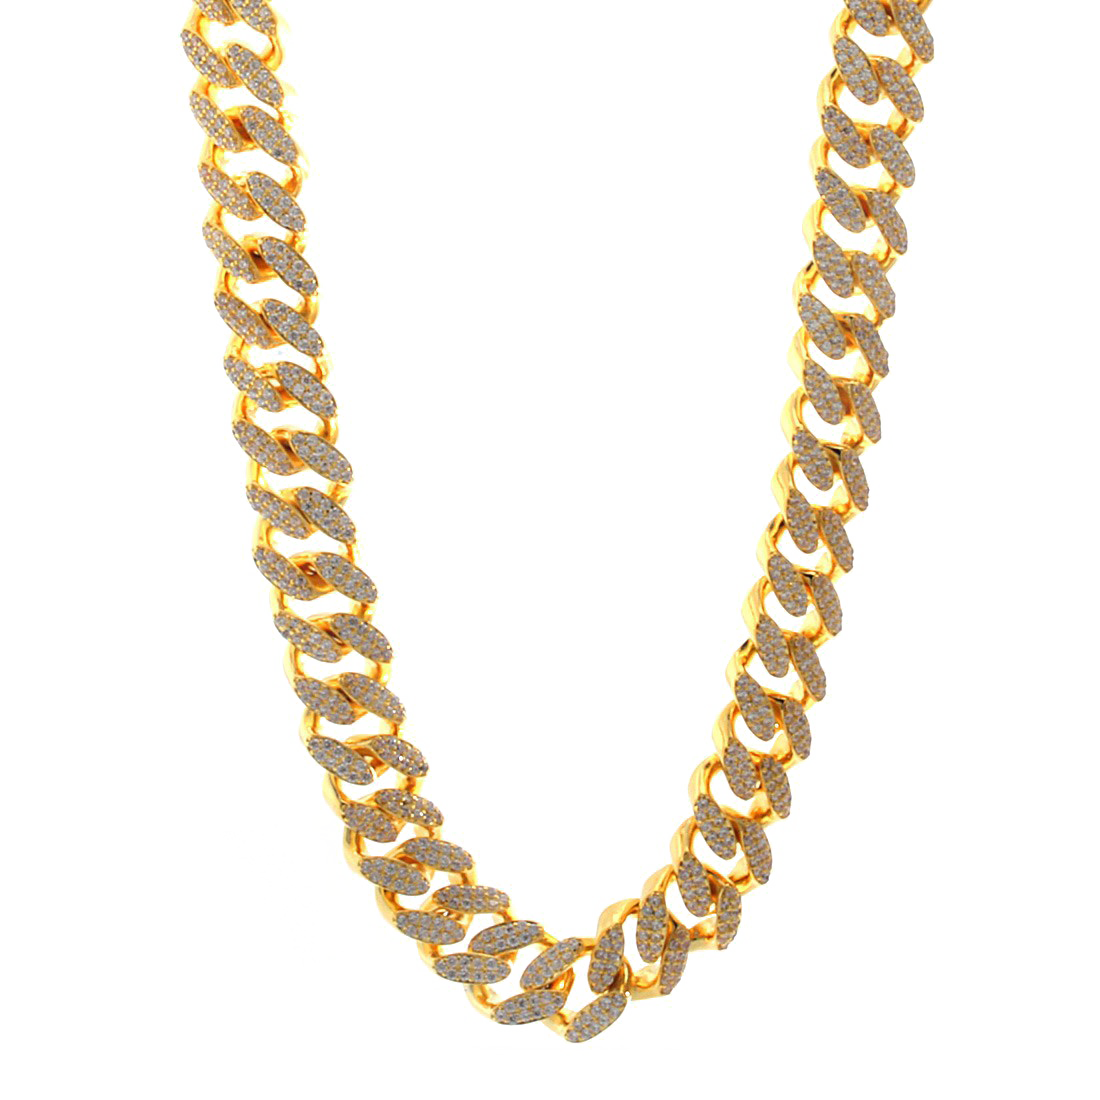 Gold Chains Png : Download transparent gold chain png for free on ...